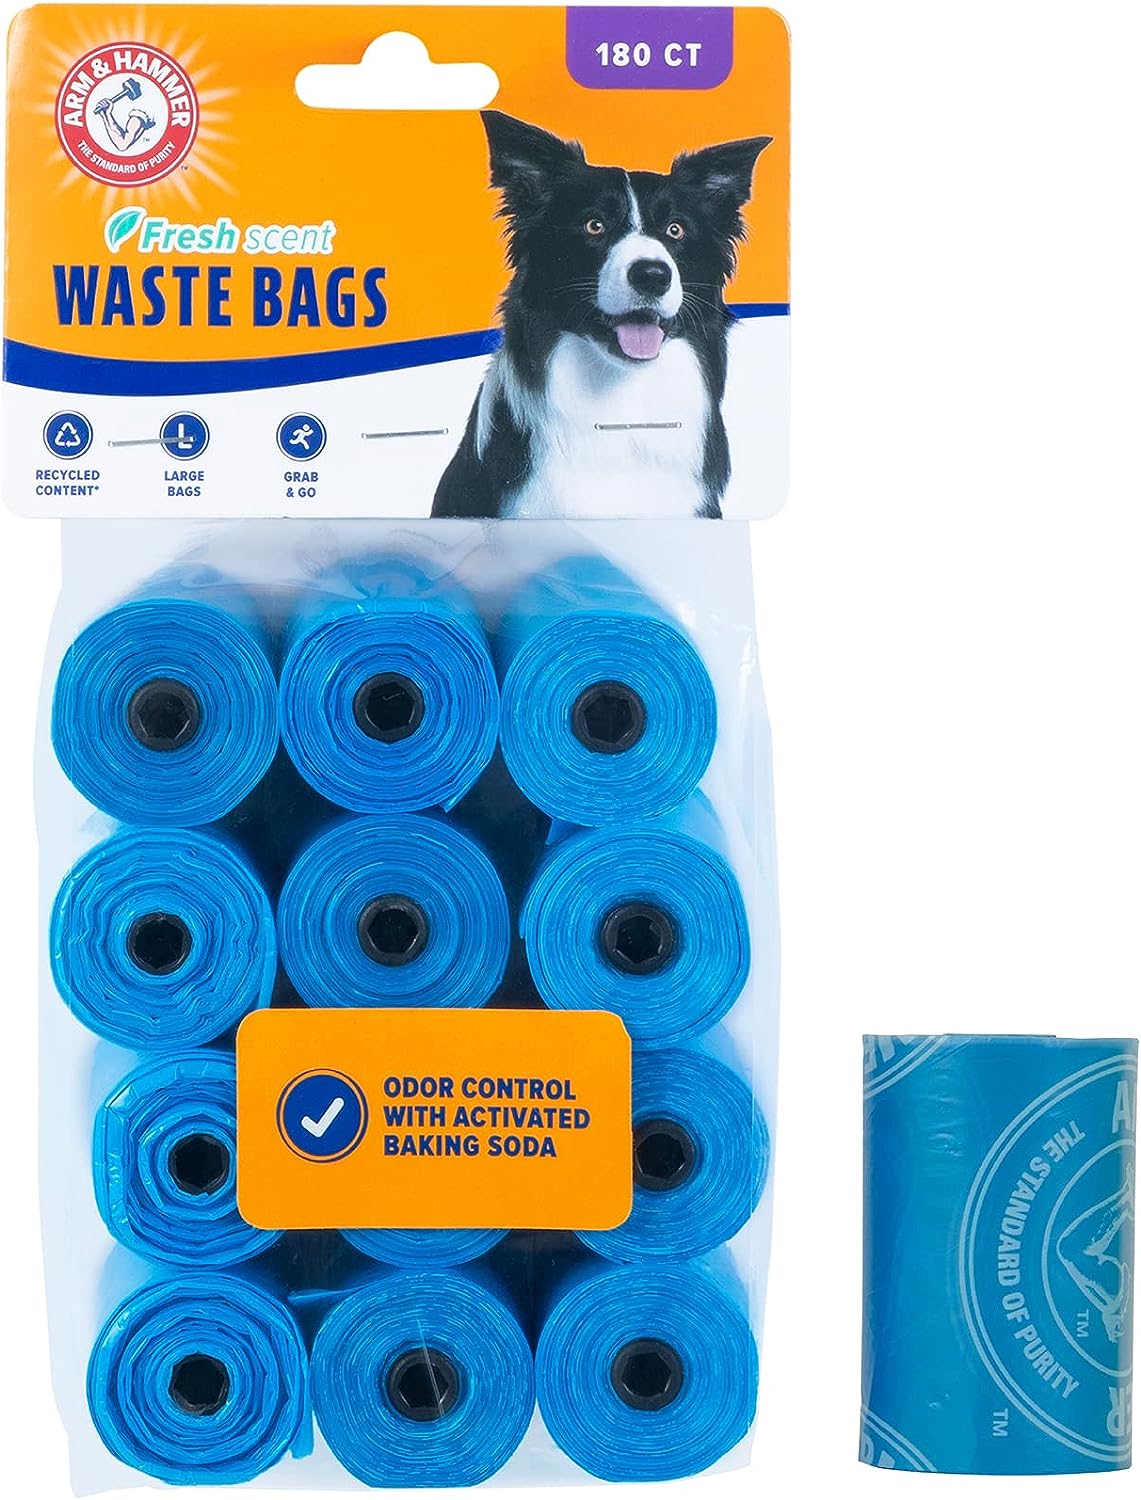 Arm & Hammer Durable Disposable Dog And Cat Waste Bags With Activated Baking Soda, 180 Dog Poop Bags, 9 x 14 Inches, Blue